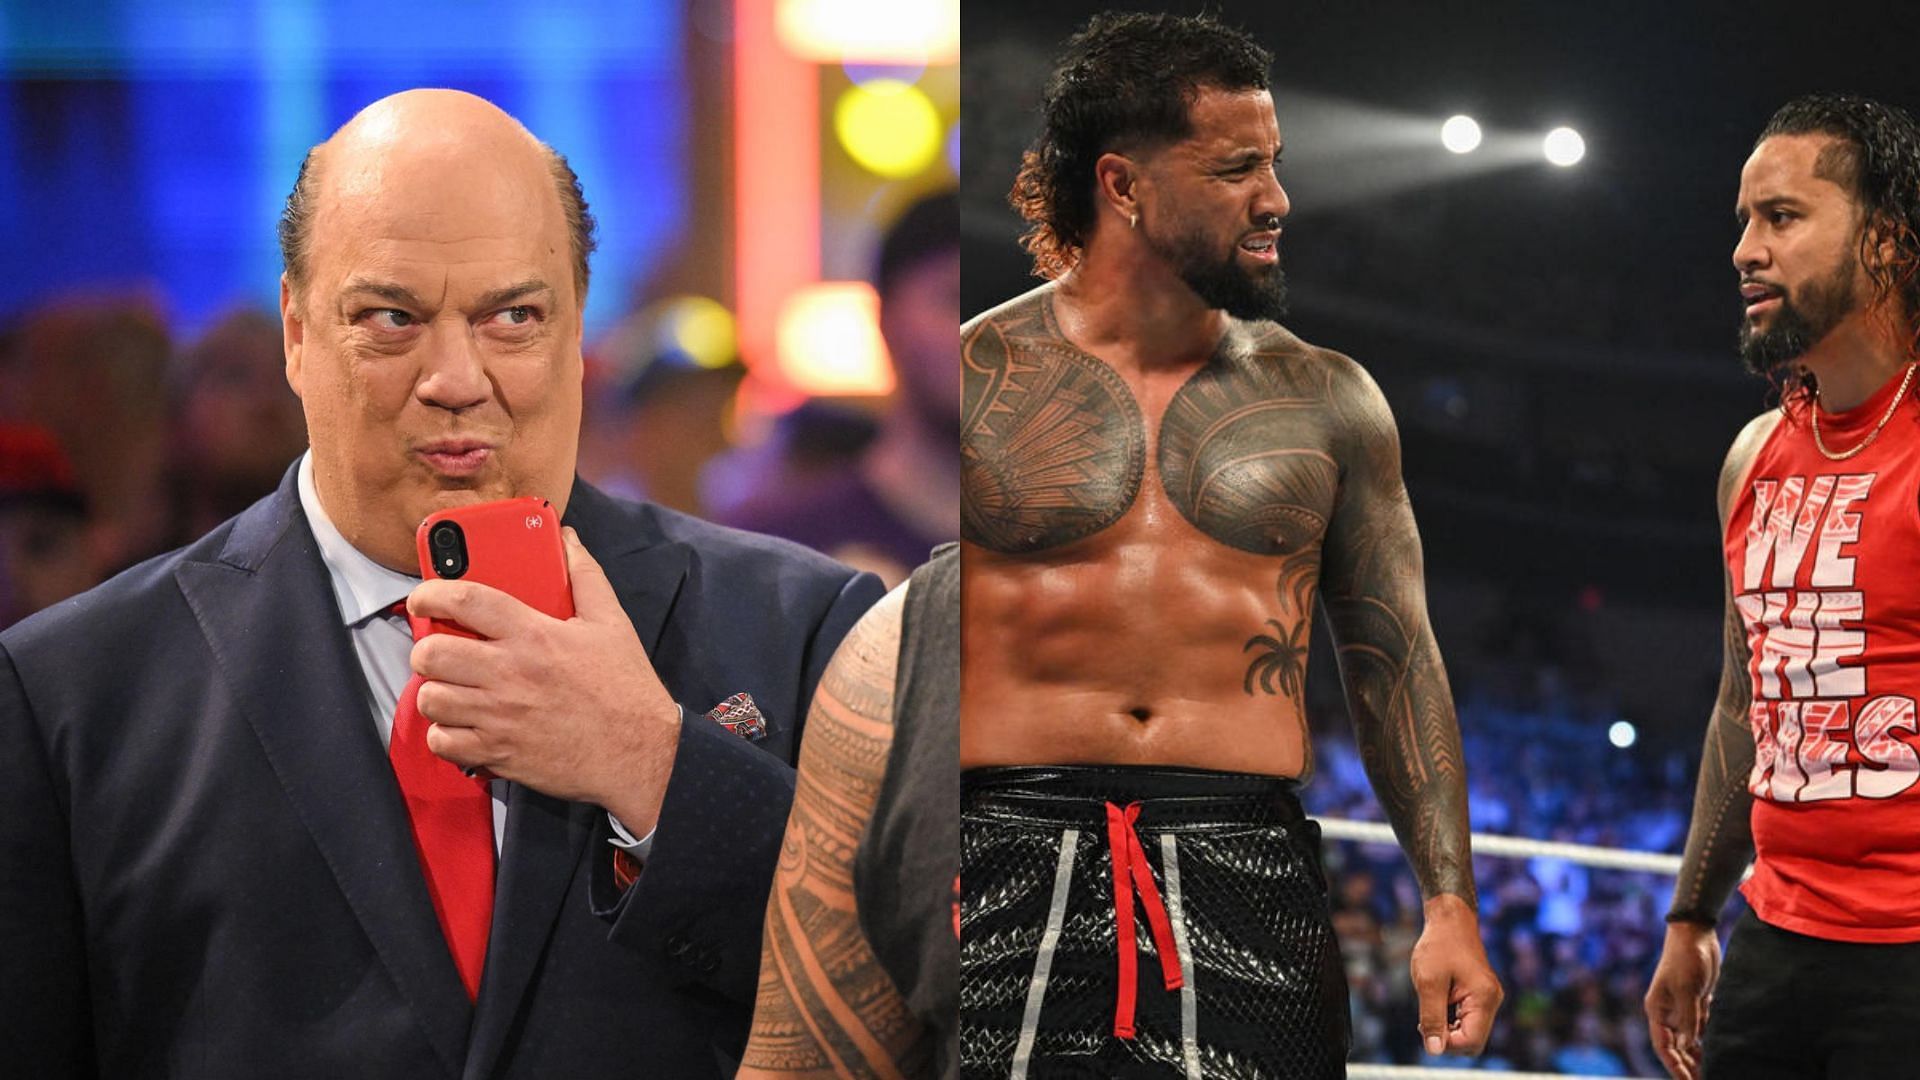 Where will the Bloodline story go next after Paul Heyman